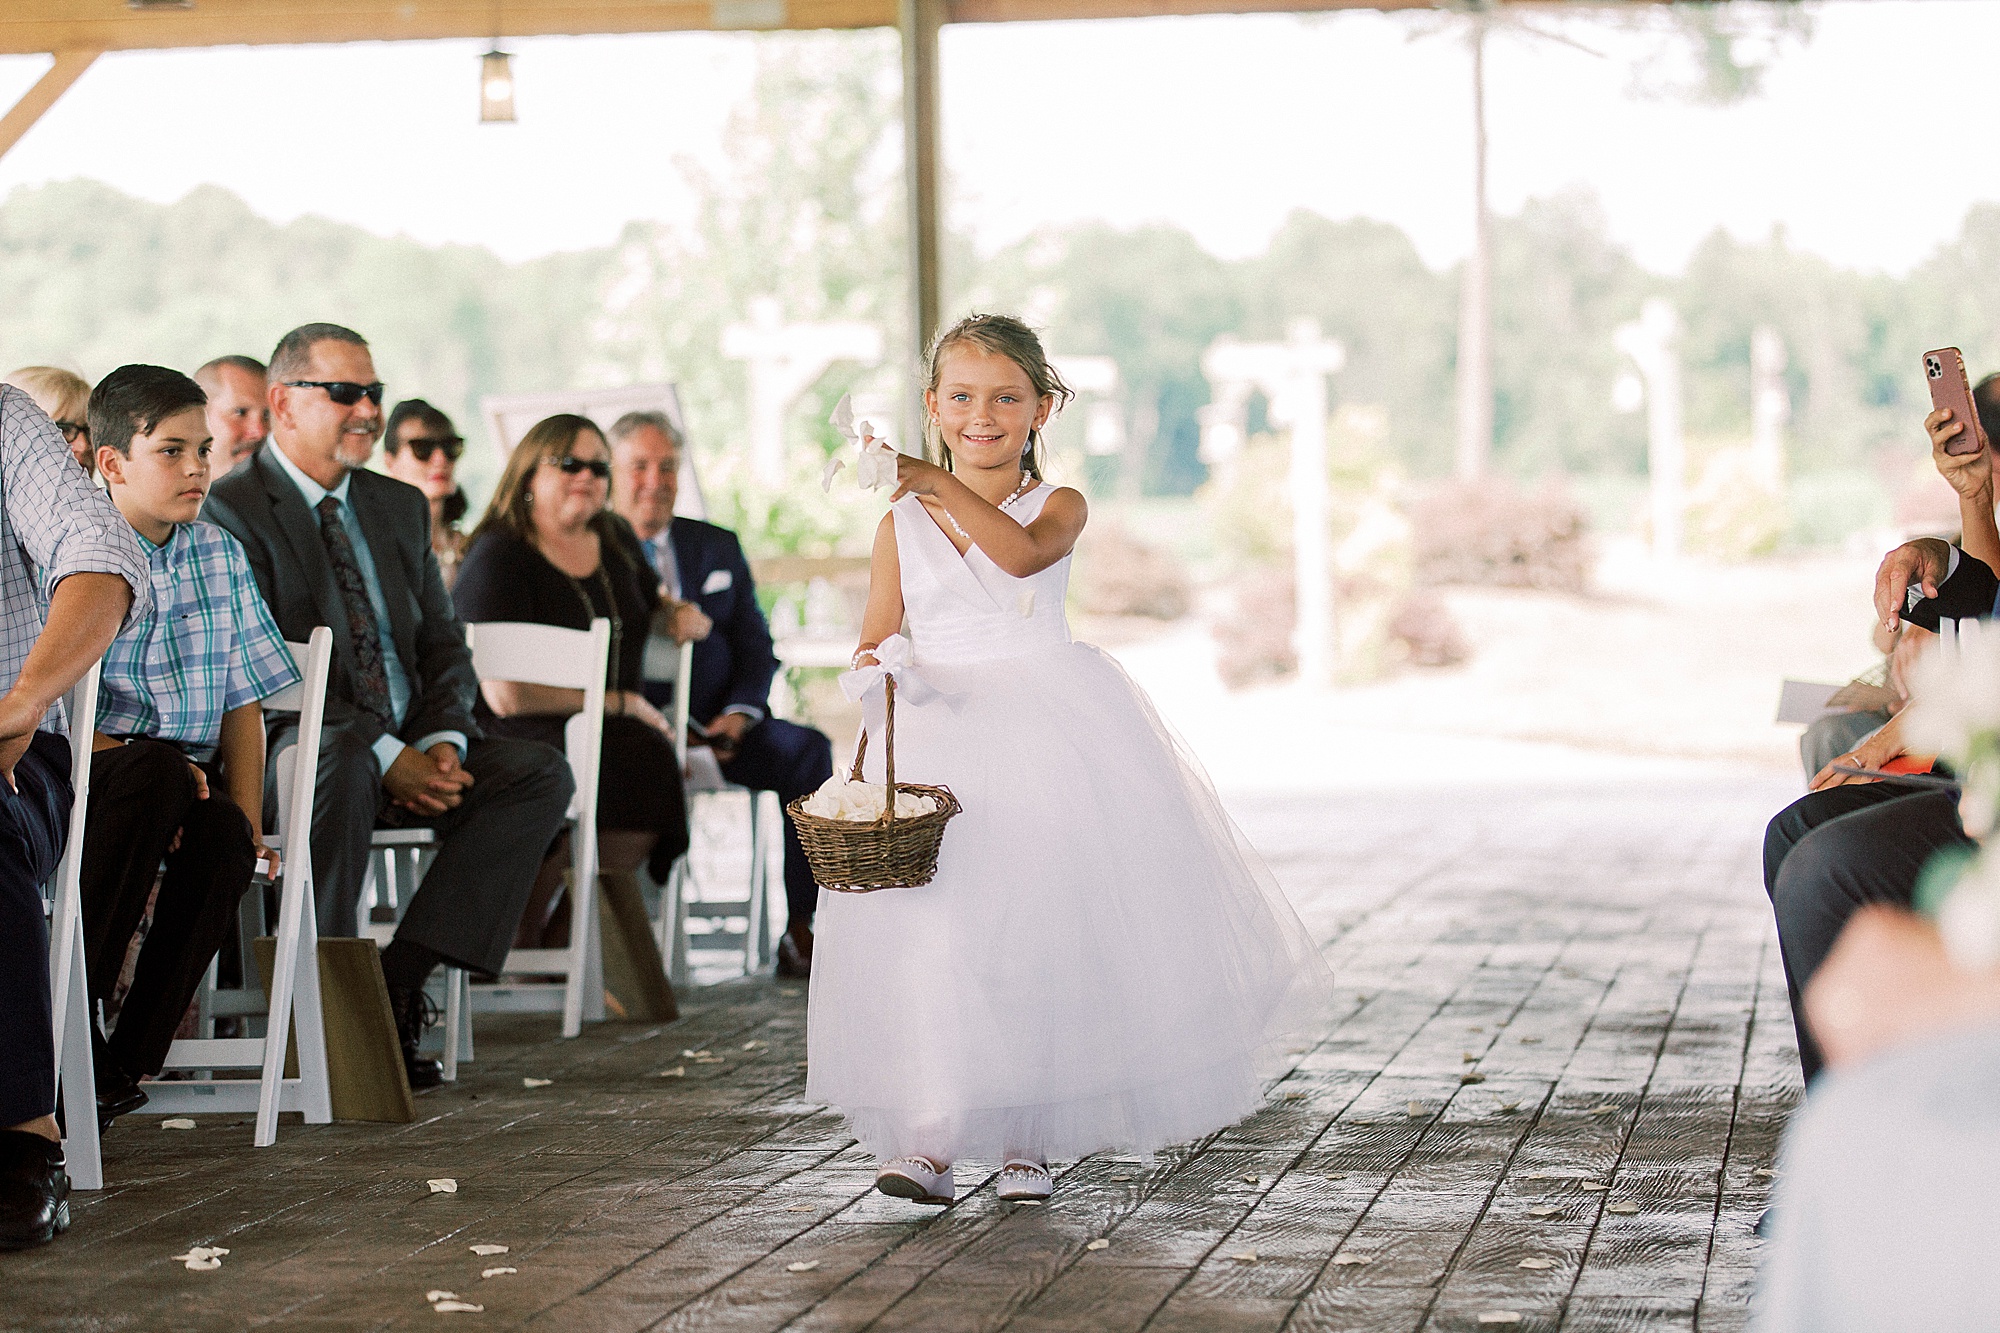 flower girl walks down aisle at rustic wedding ceremony by wooden cross at The Farmstead